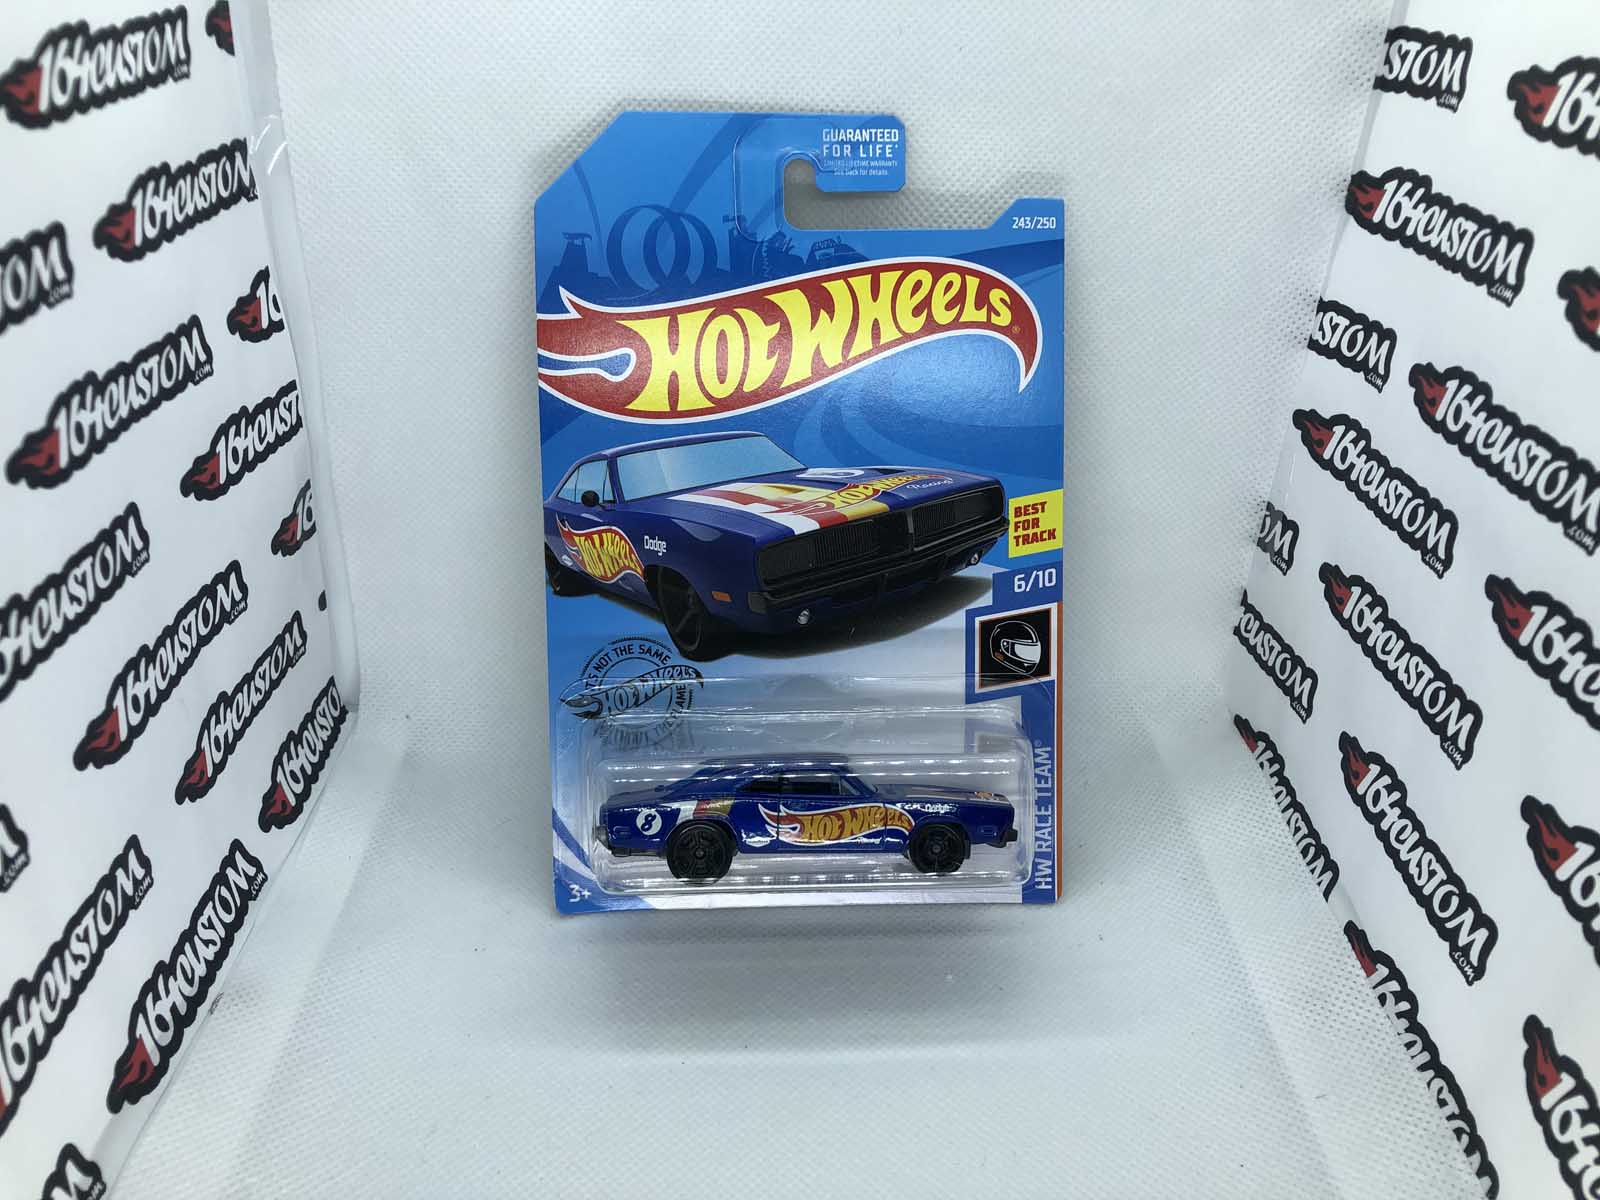 '69 Dodge Charger Hot Wheels